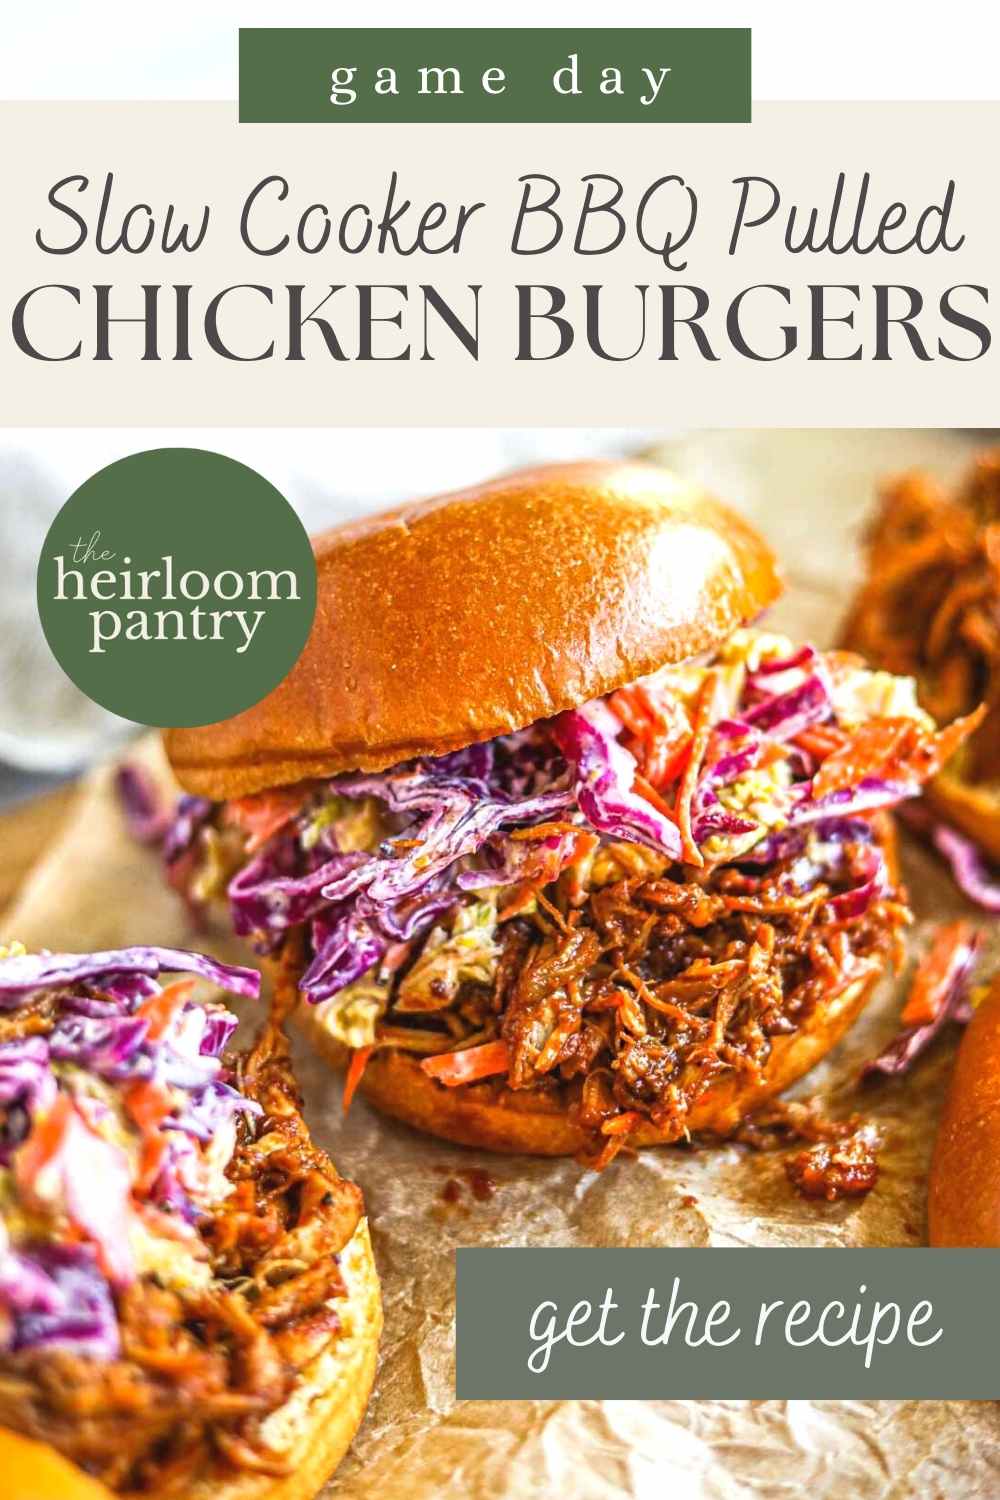 Slow cooker BBQ pulled chicken burger Pinterest pin.